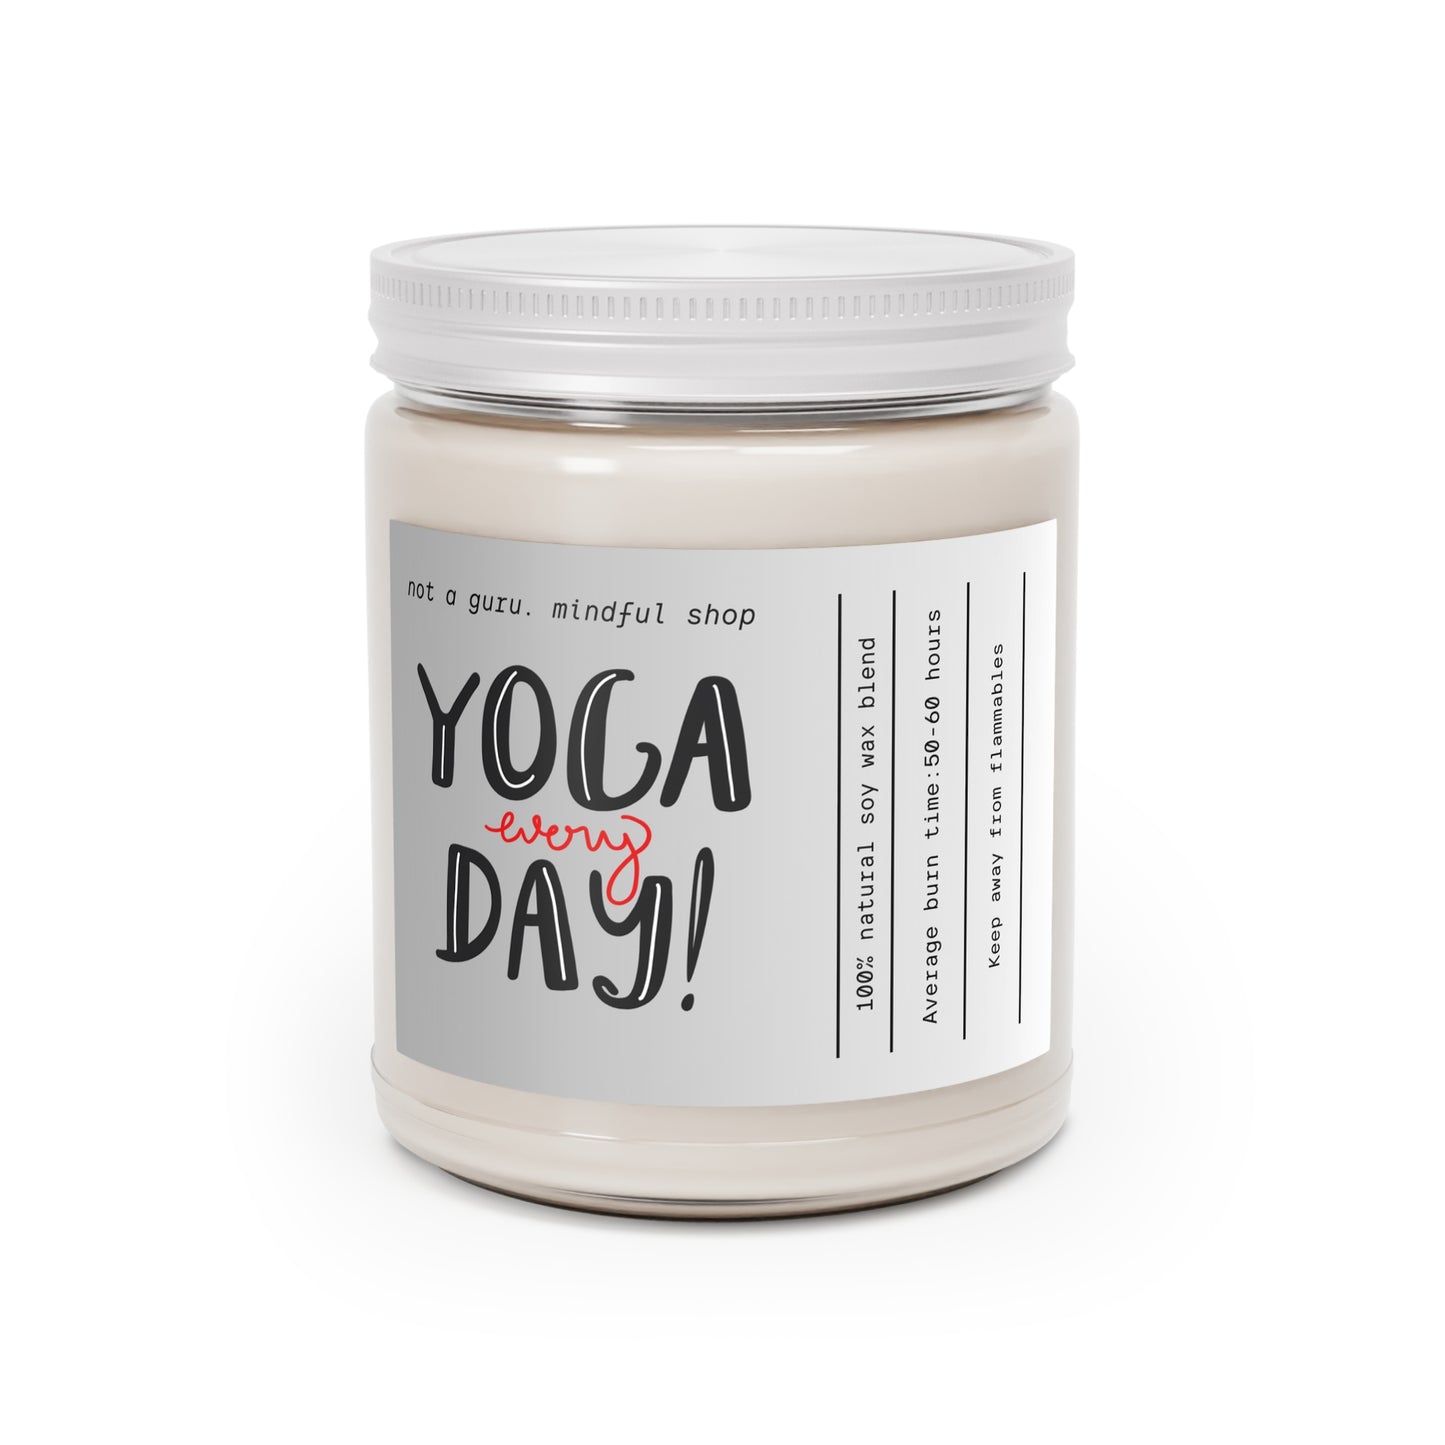 Yoga Every Day Scented Candles